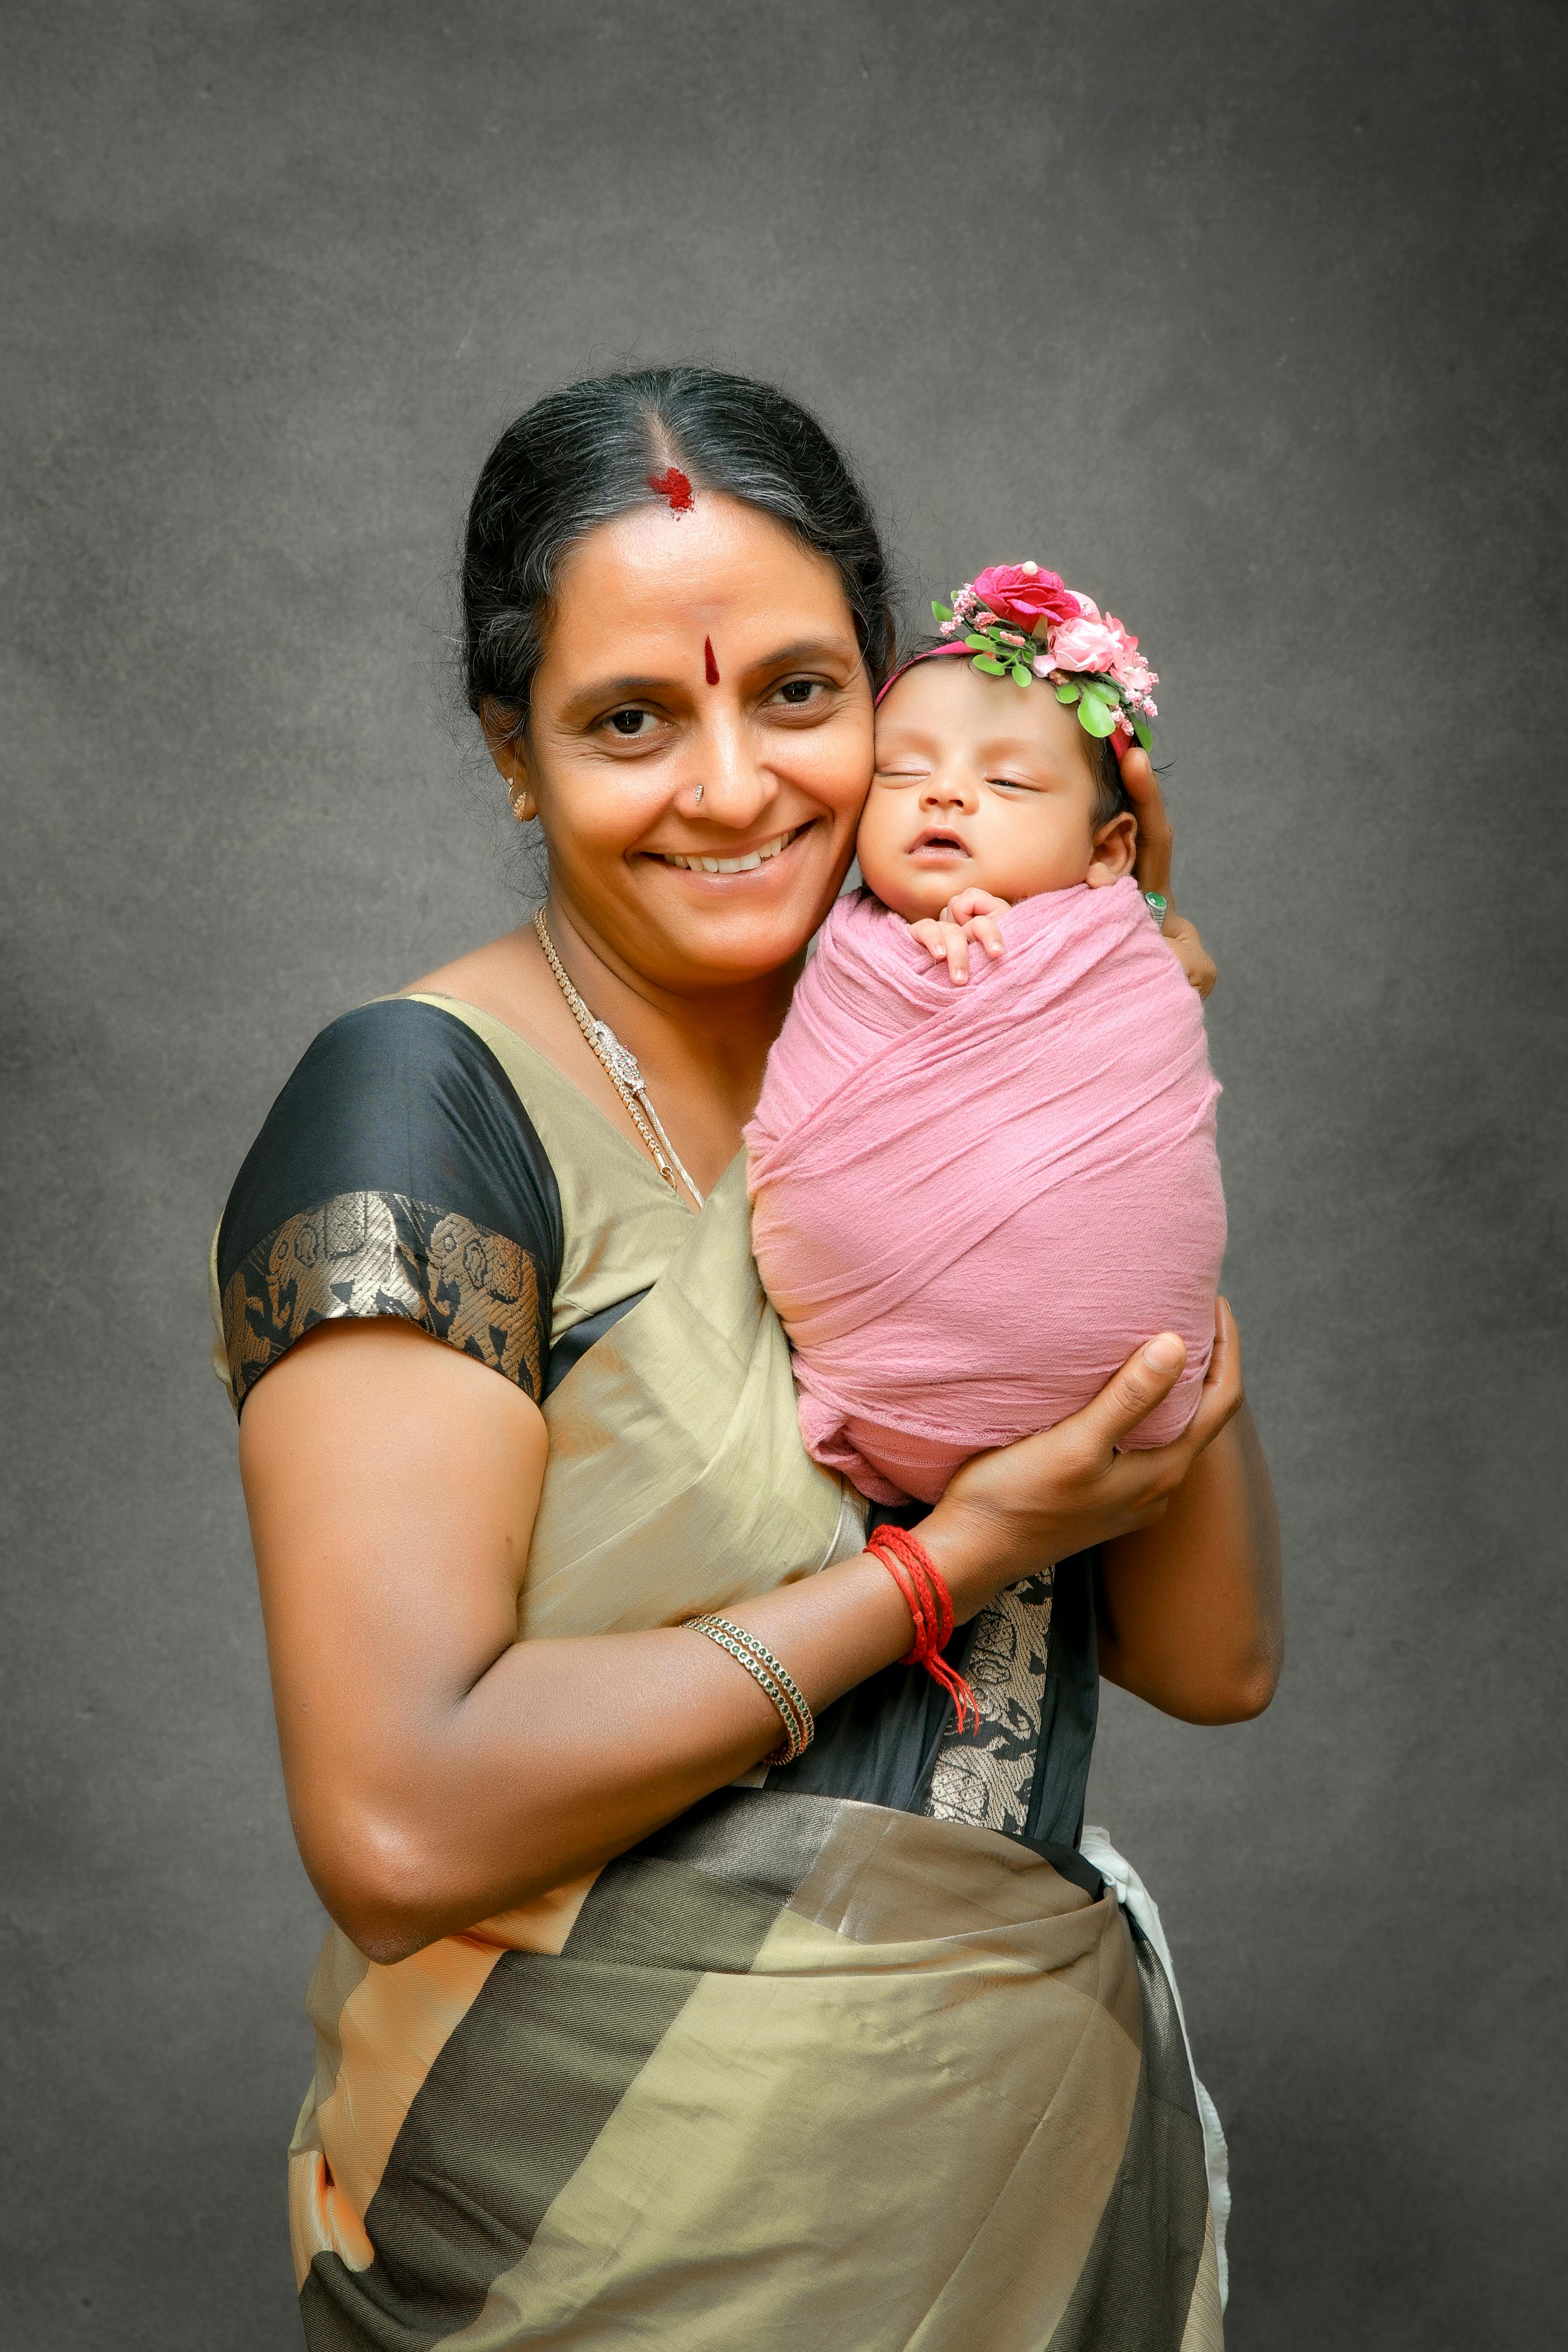 Traditional Indian Clothes Maternity Photos